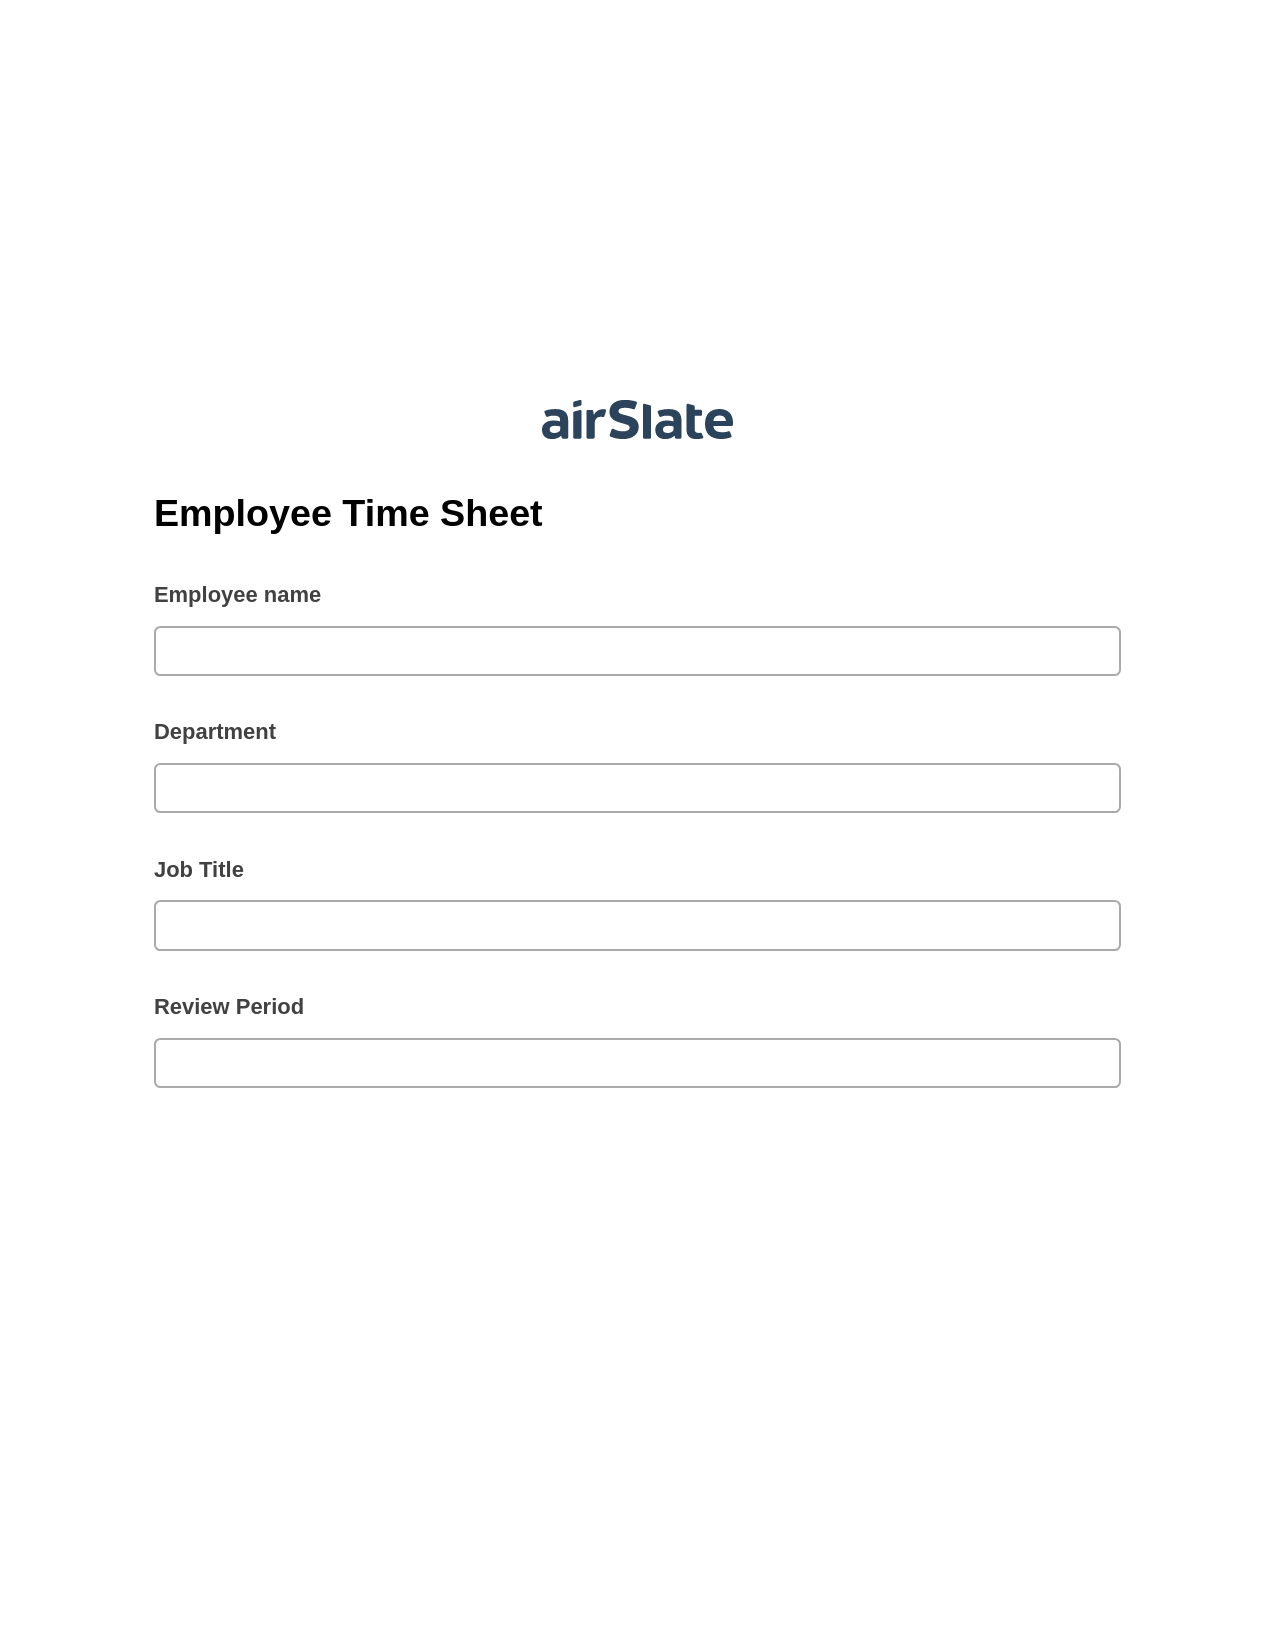 Employee Time Sheet Pre-fill from Salesforce Records with SOQL Bot, Create MS Dynamics 365 Records Bot, Export to WebMerge Bot